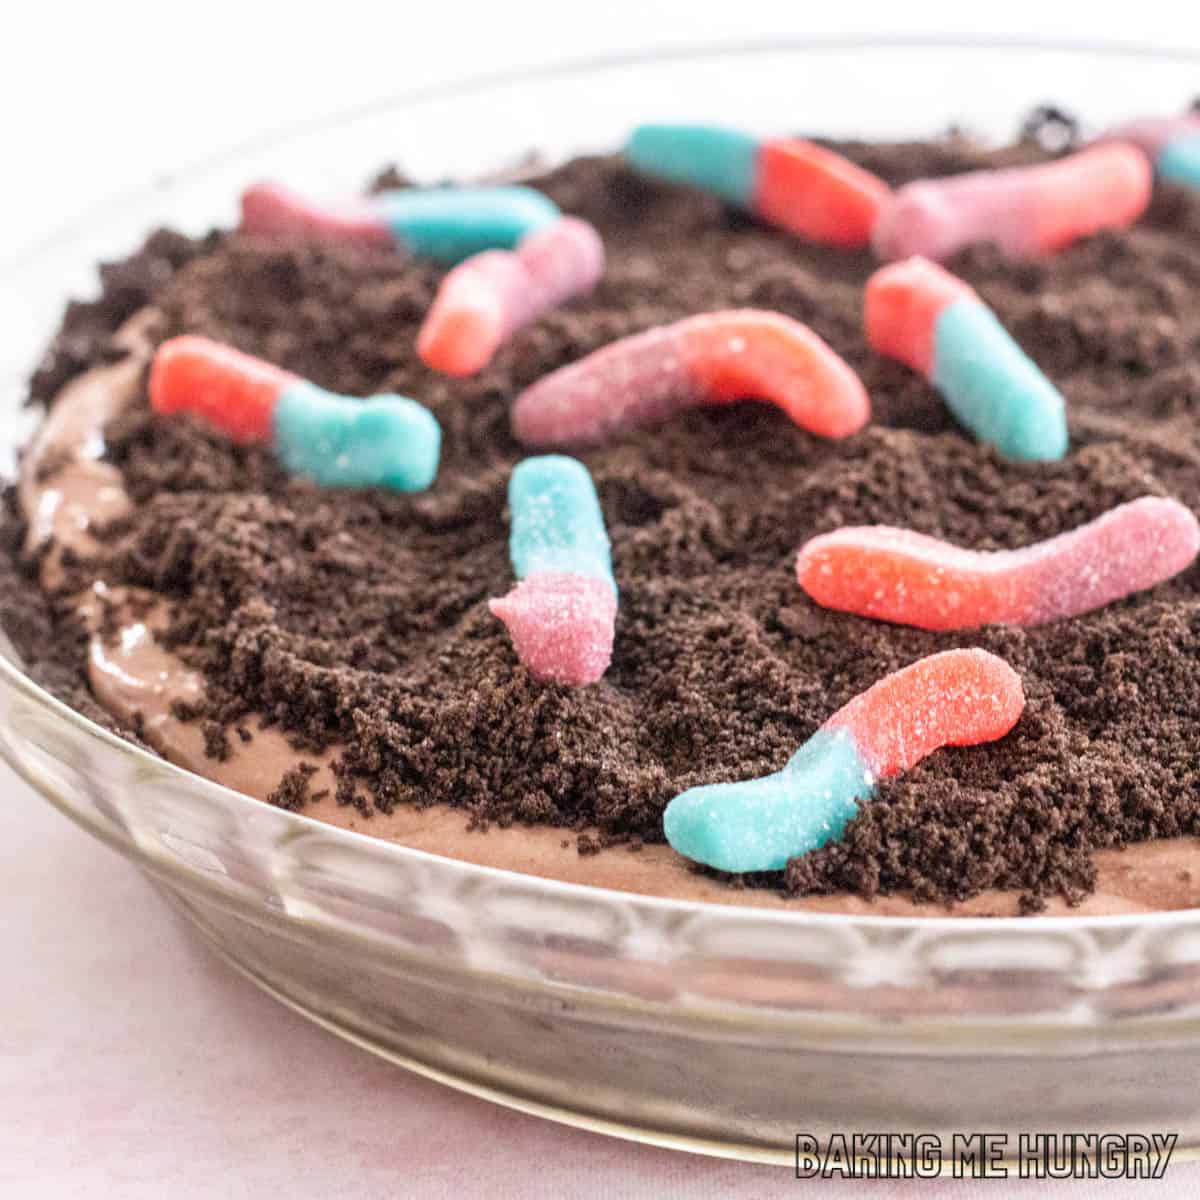 mud pie recipe with gummy worms shown from the side close up in glass pie plate